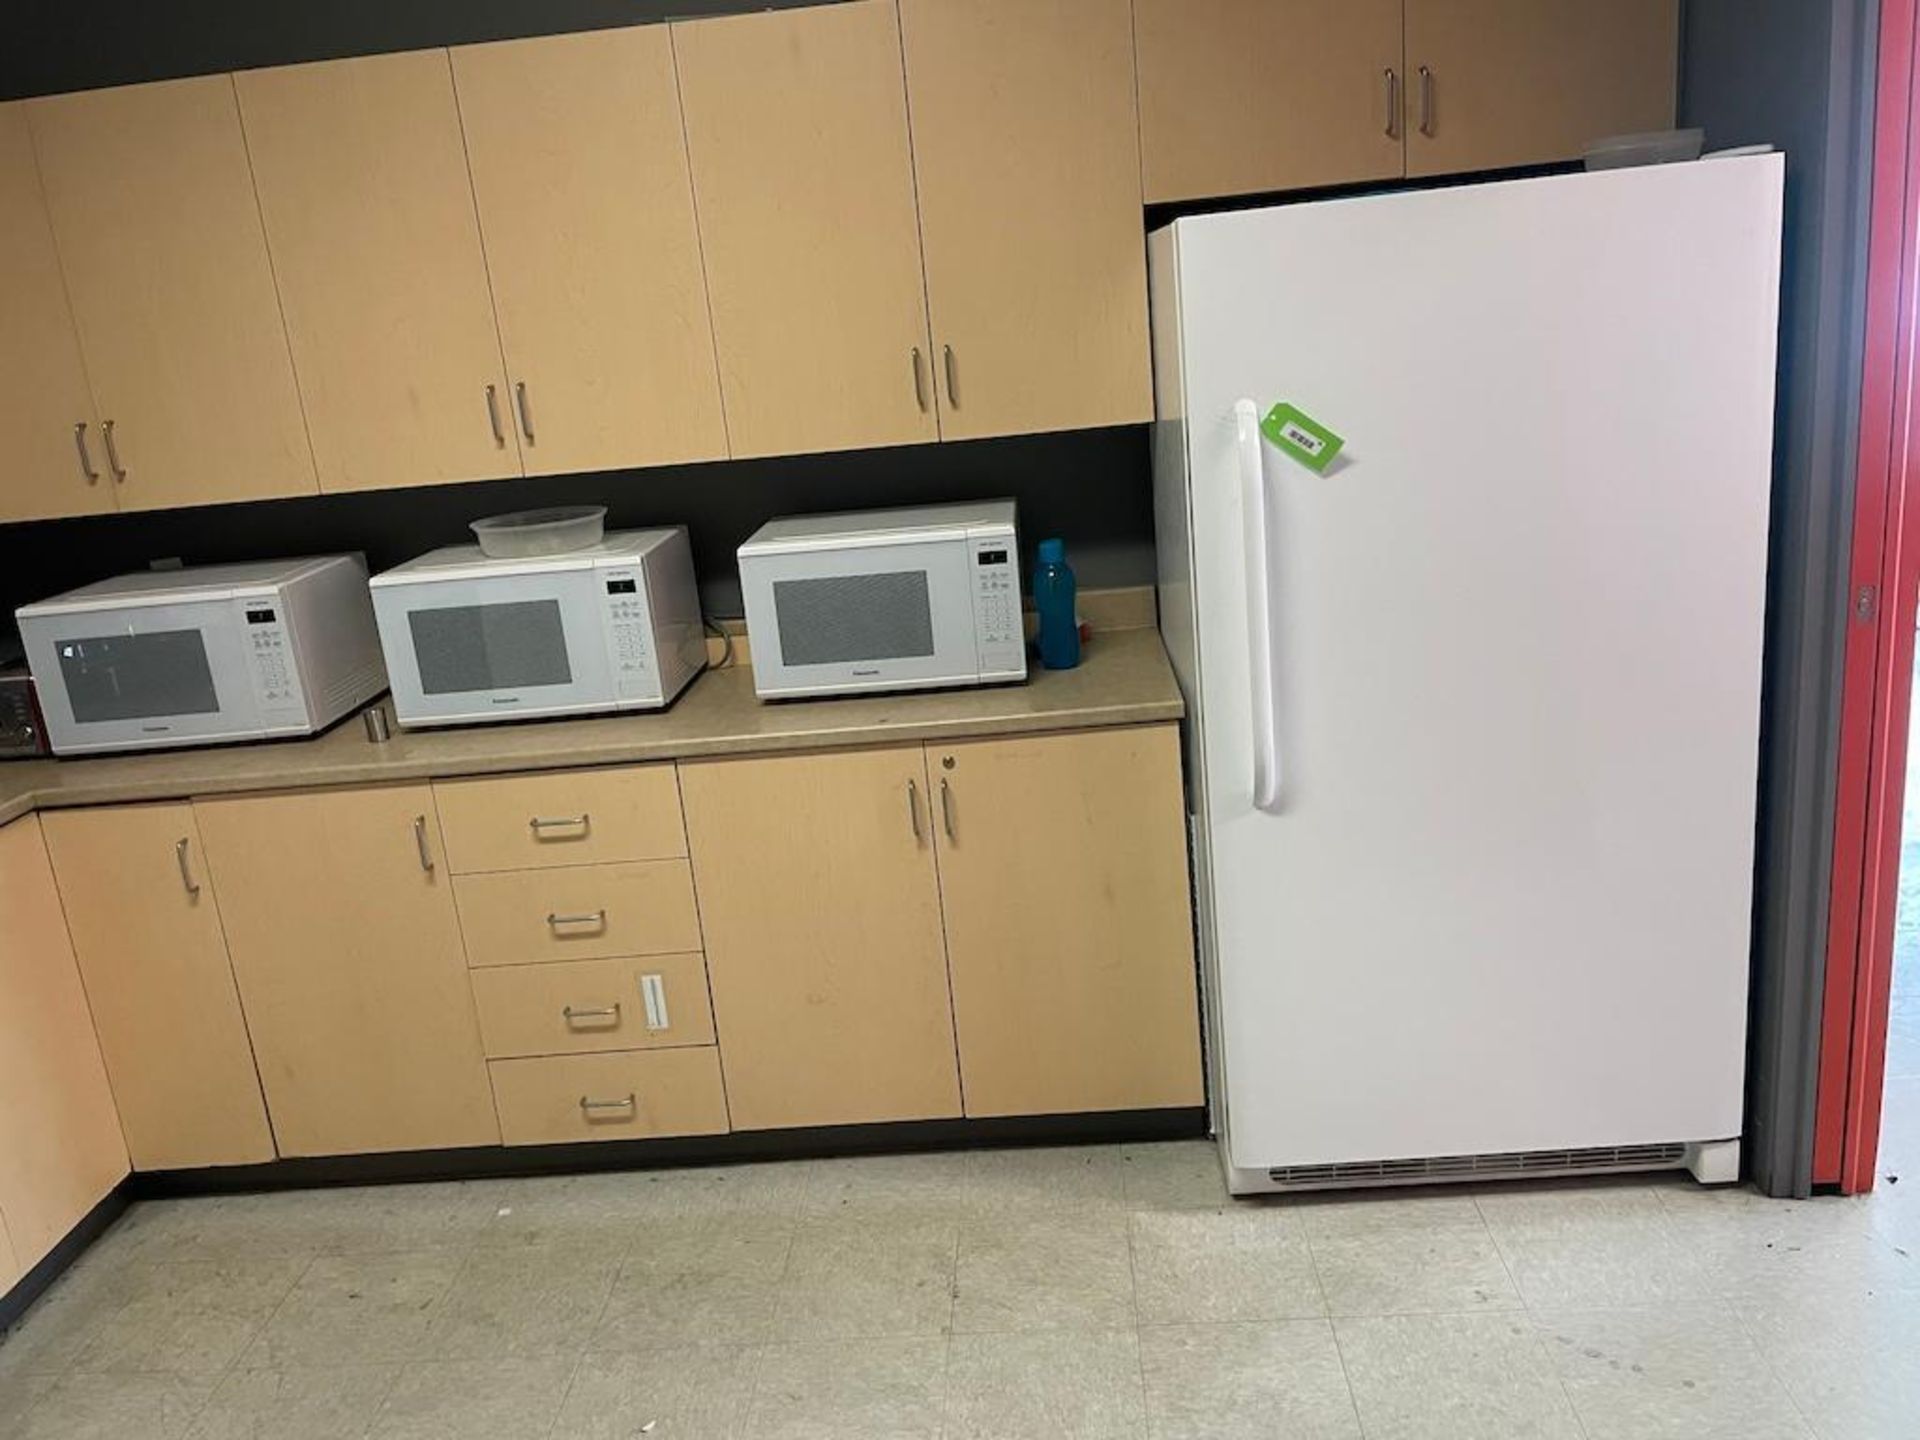 LOT KITCHEN APPLIANCES: (1) REFRIGERATOR, (3) MICROWAVES [TROIS RIVIERES]*PLEASE NOTE, EXCLUSIVE RIG